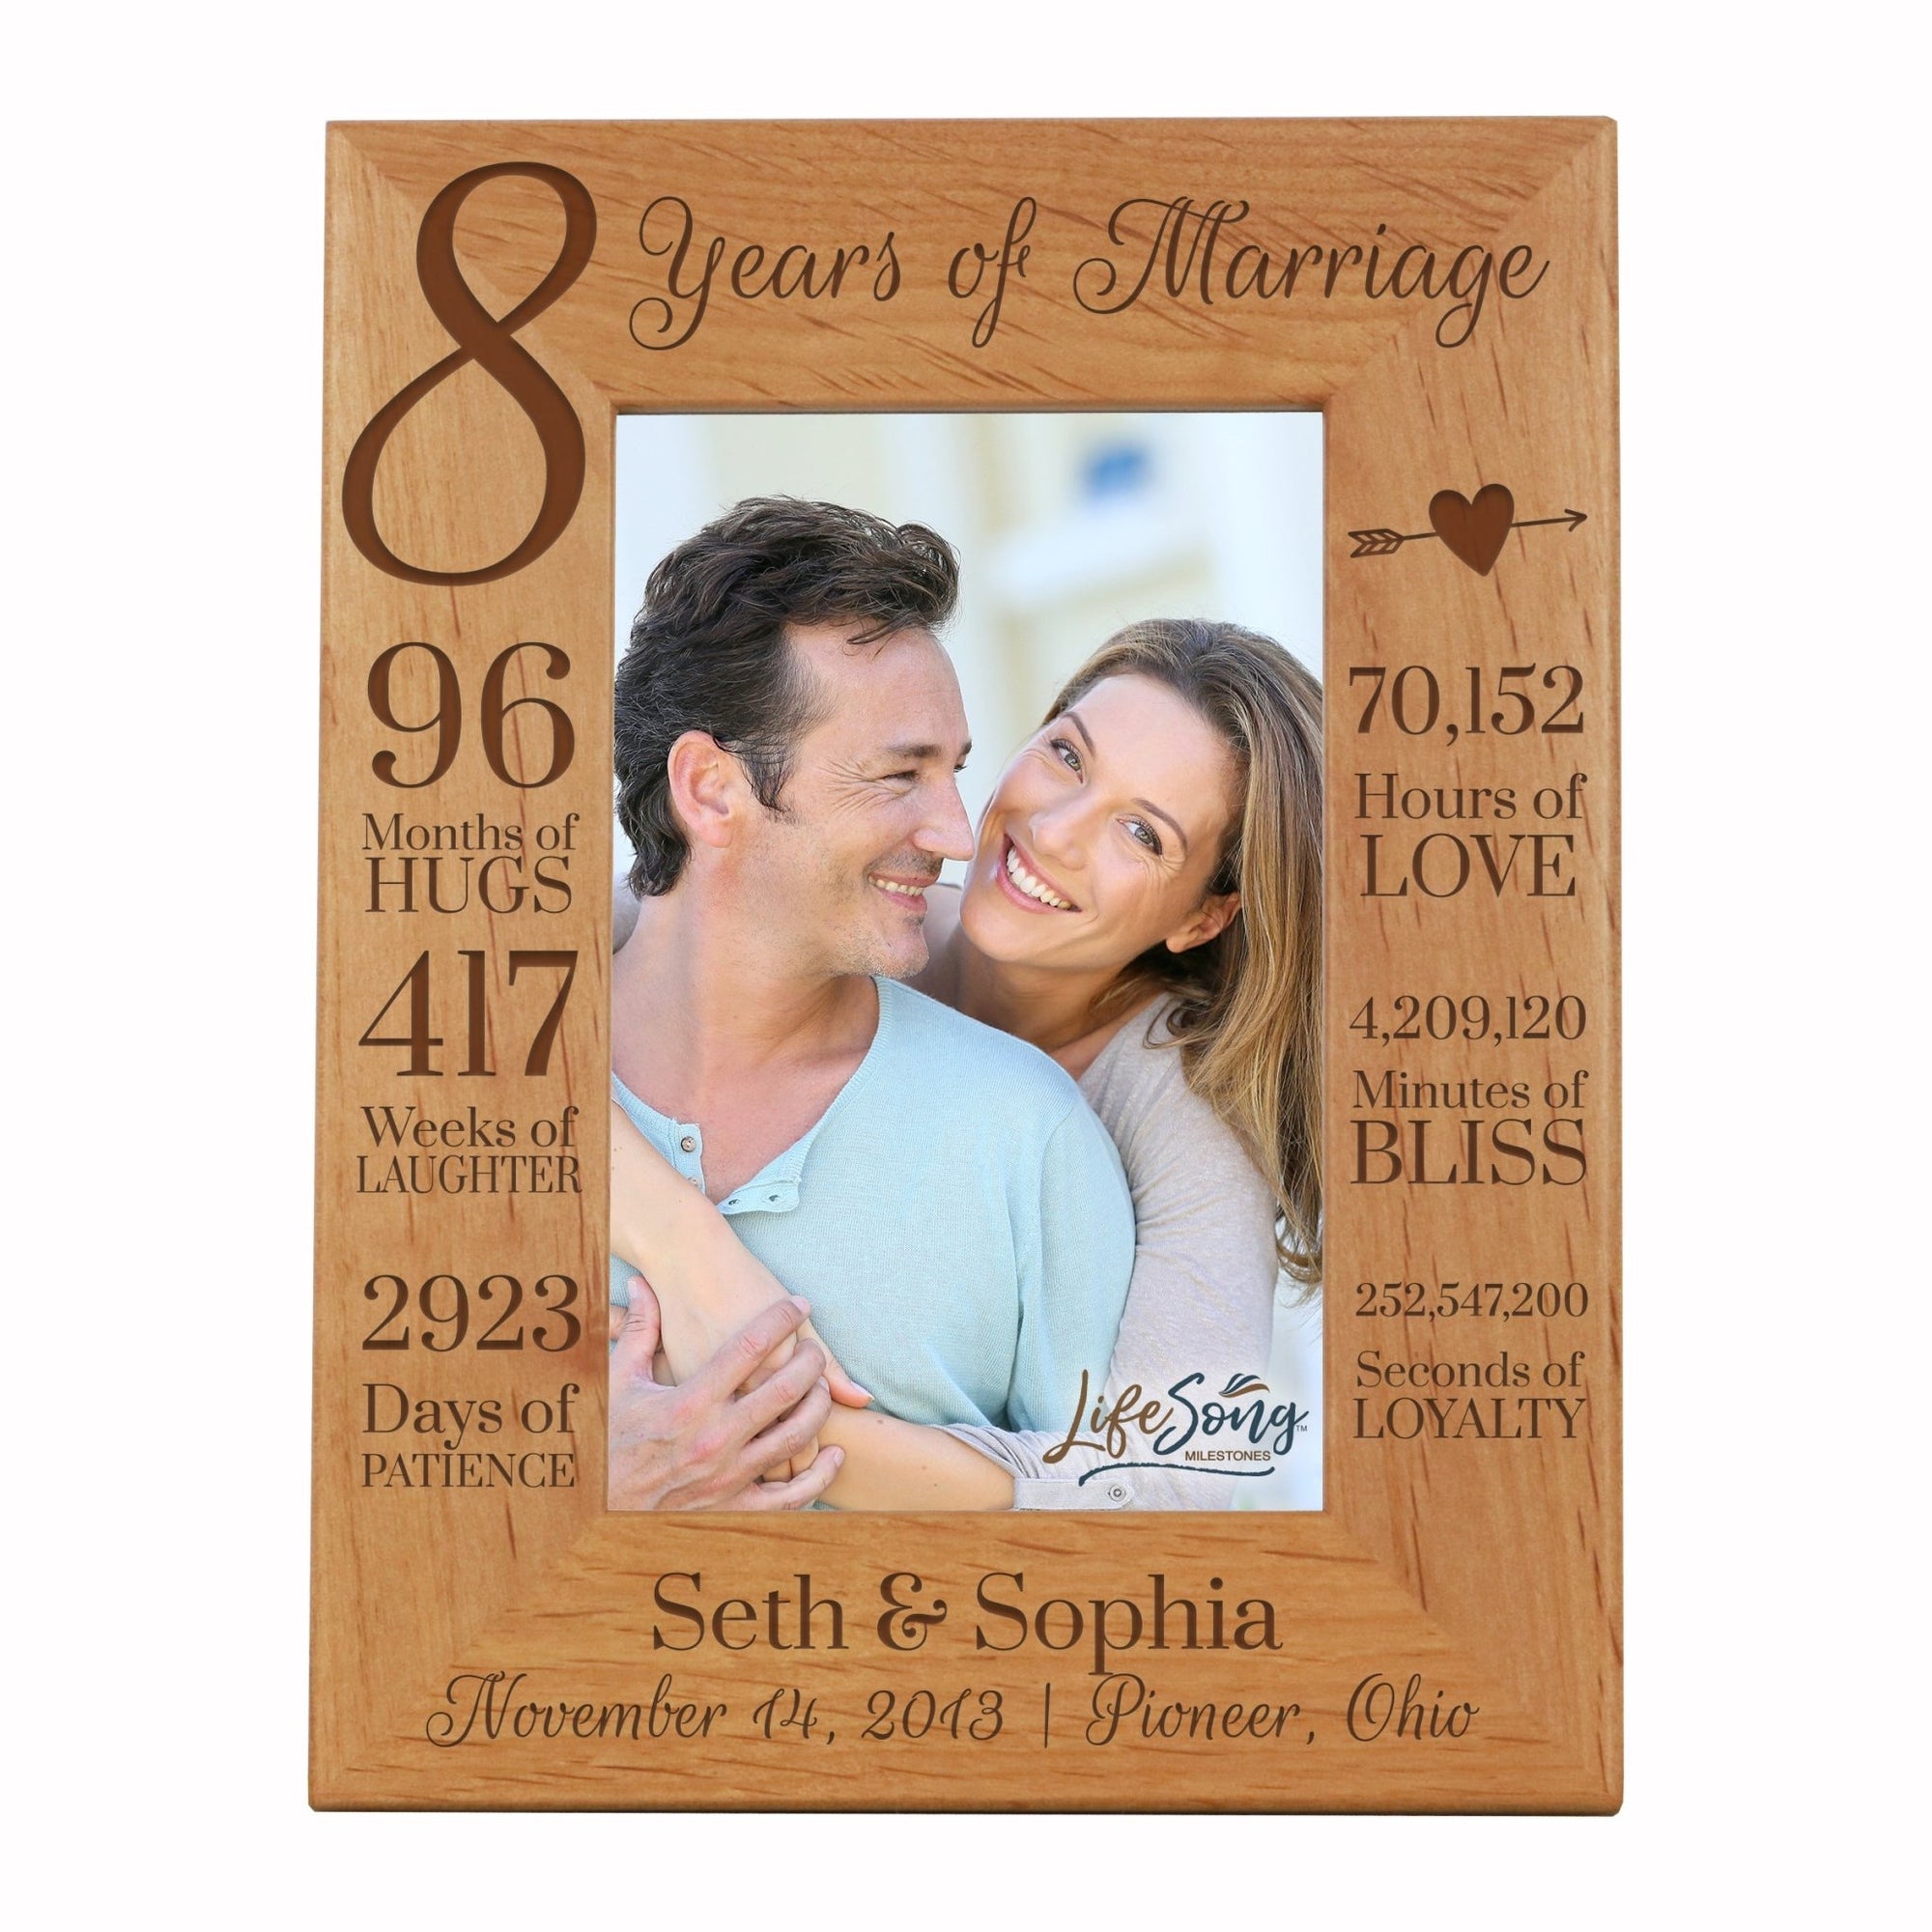 Lifesong Milestones Personalized Engraved 8th Wedding Anniversary Photo Frame Wall Decor Gift for Couples